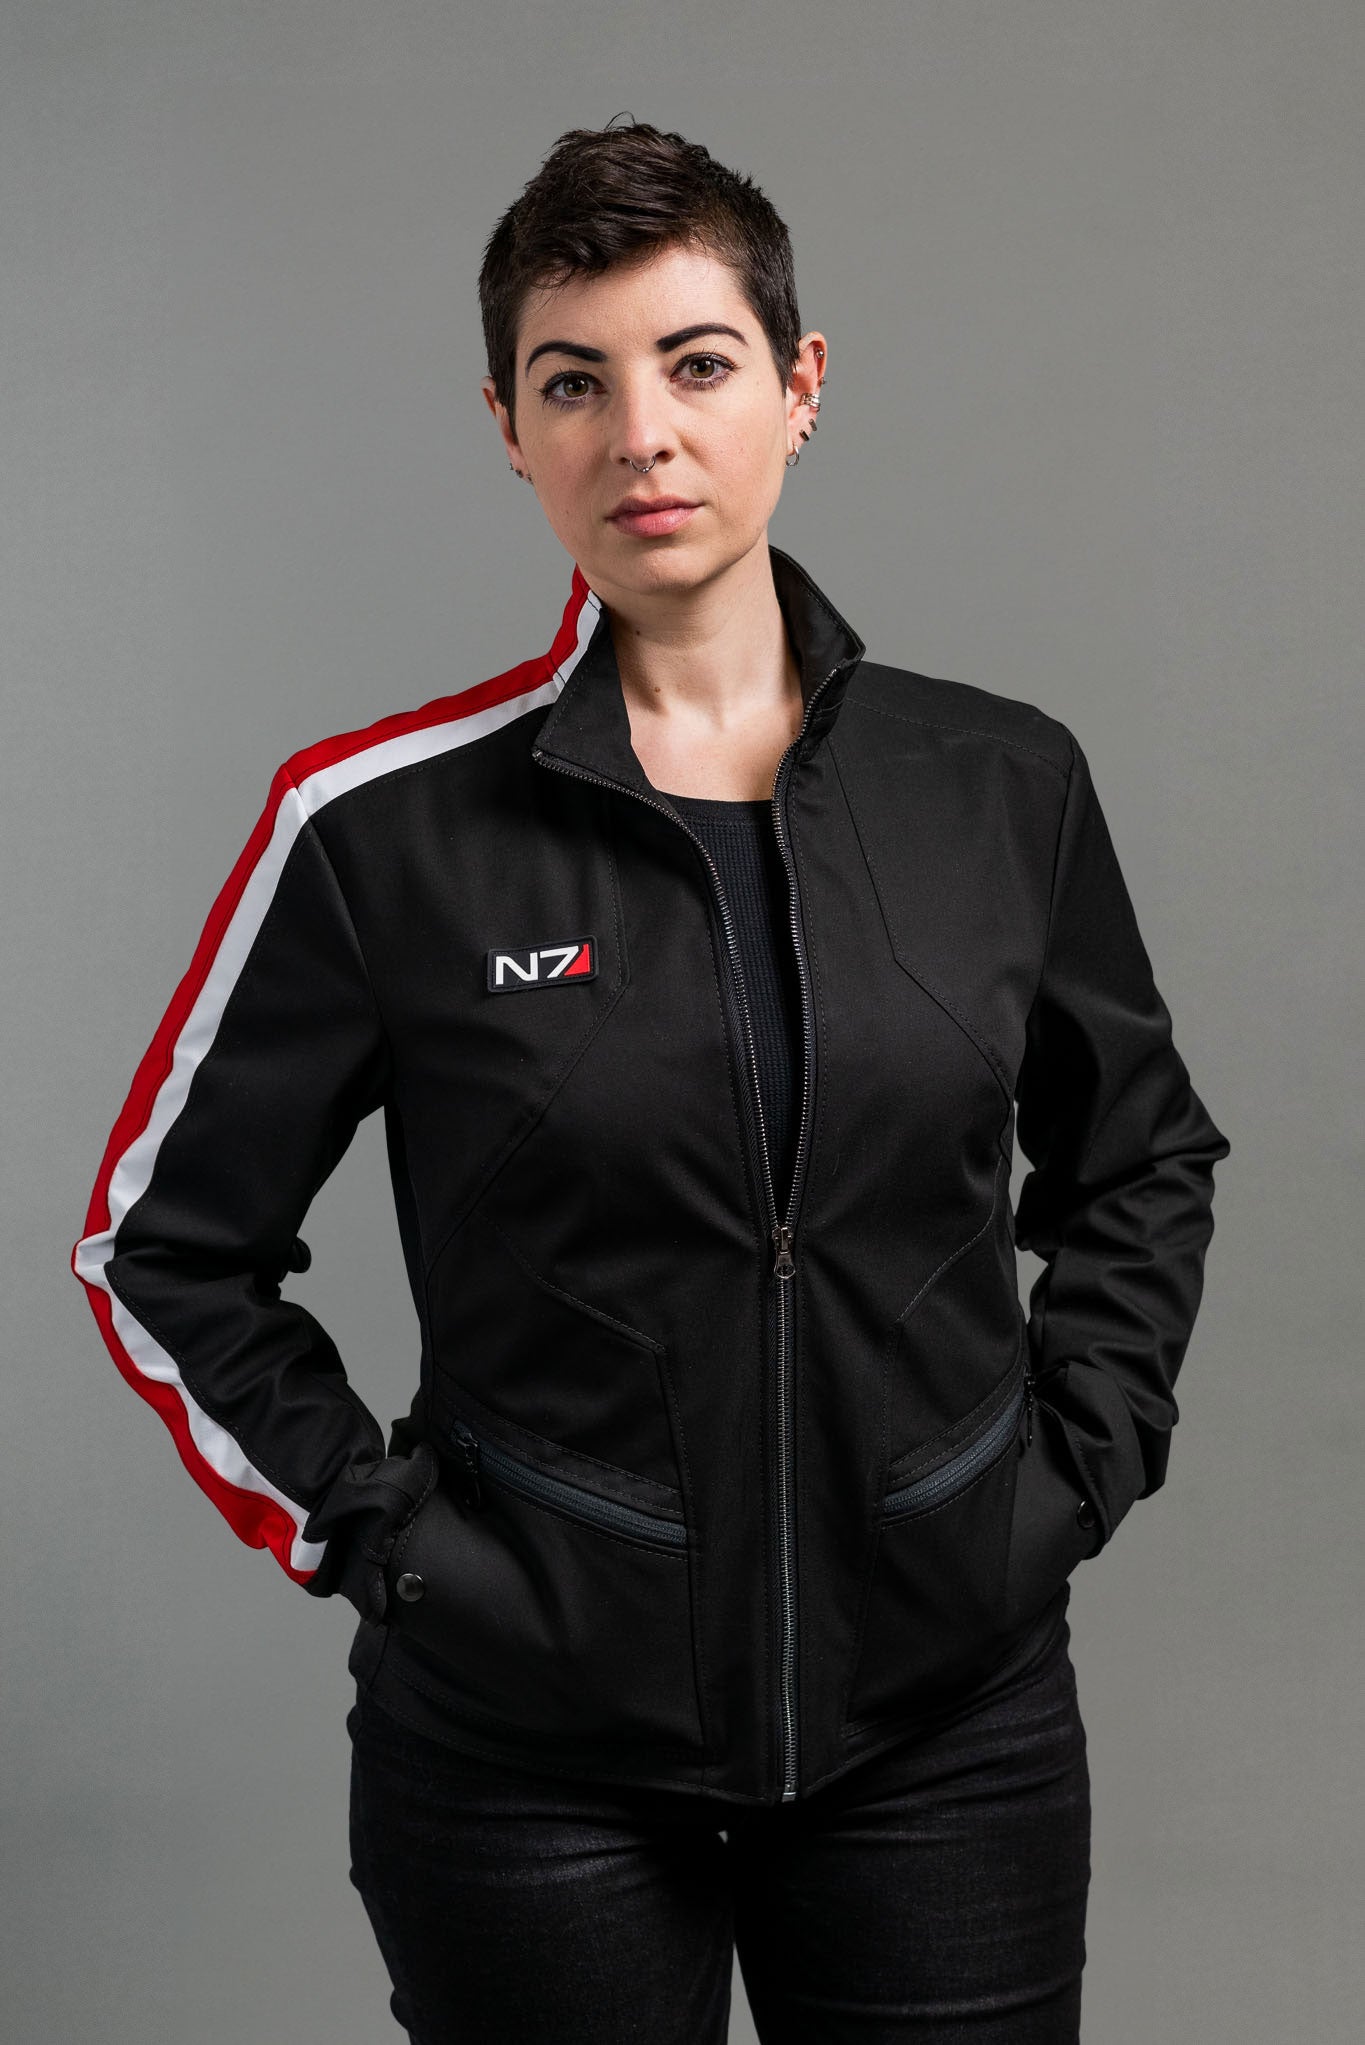 N7 Special Ops Jacket - Spectre [Womens]